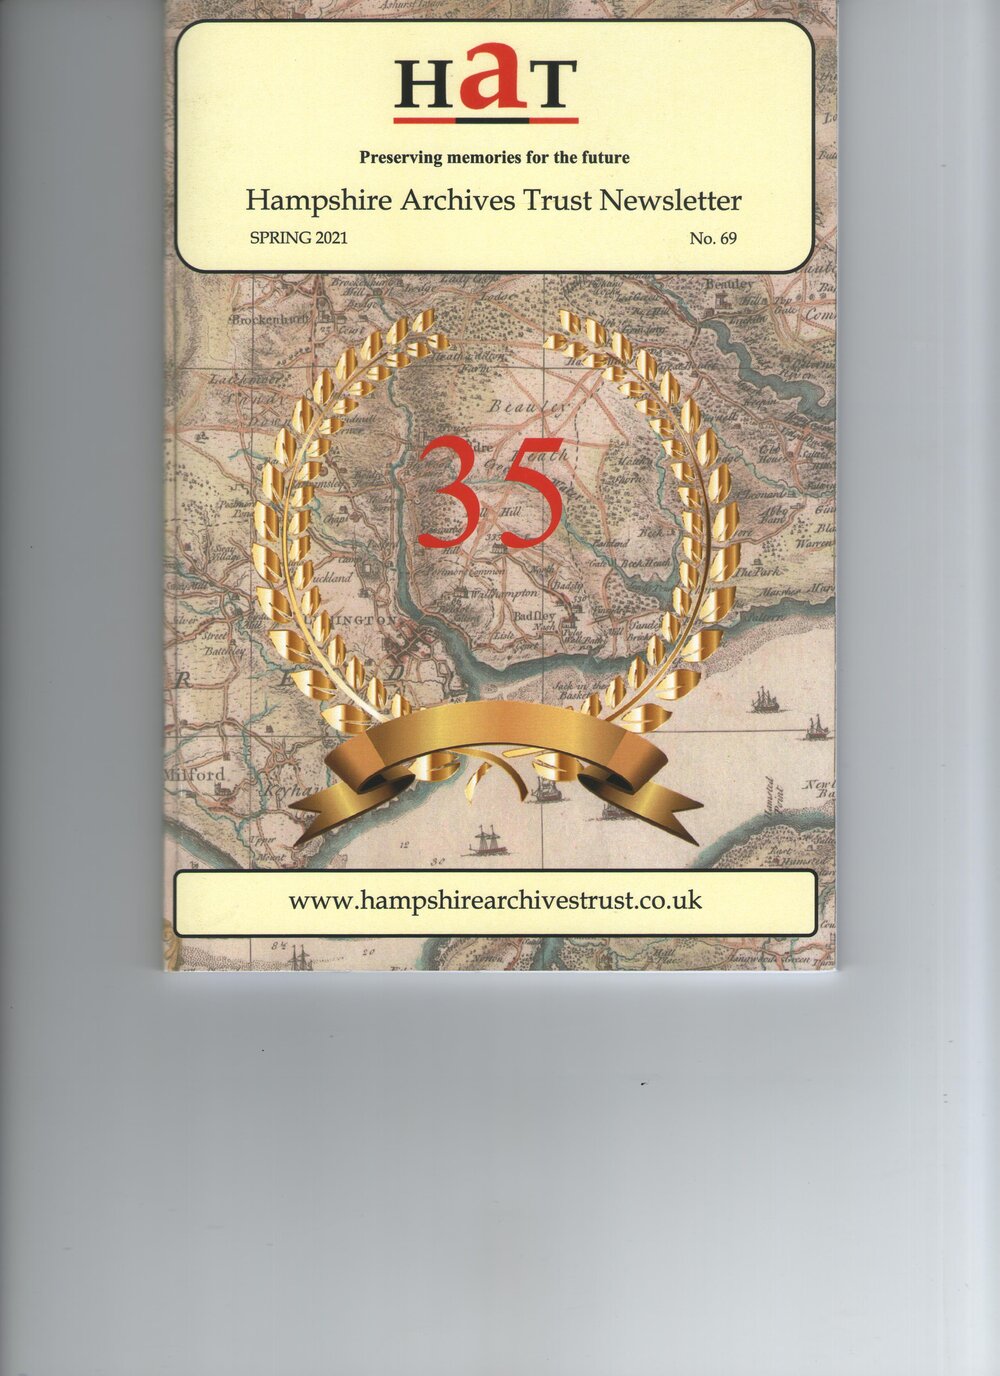  The 35th Anniversary edition of Hampshire Archives Trust Newsletter 